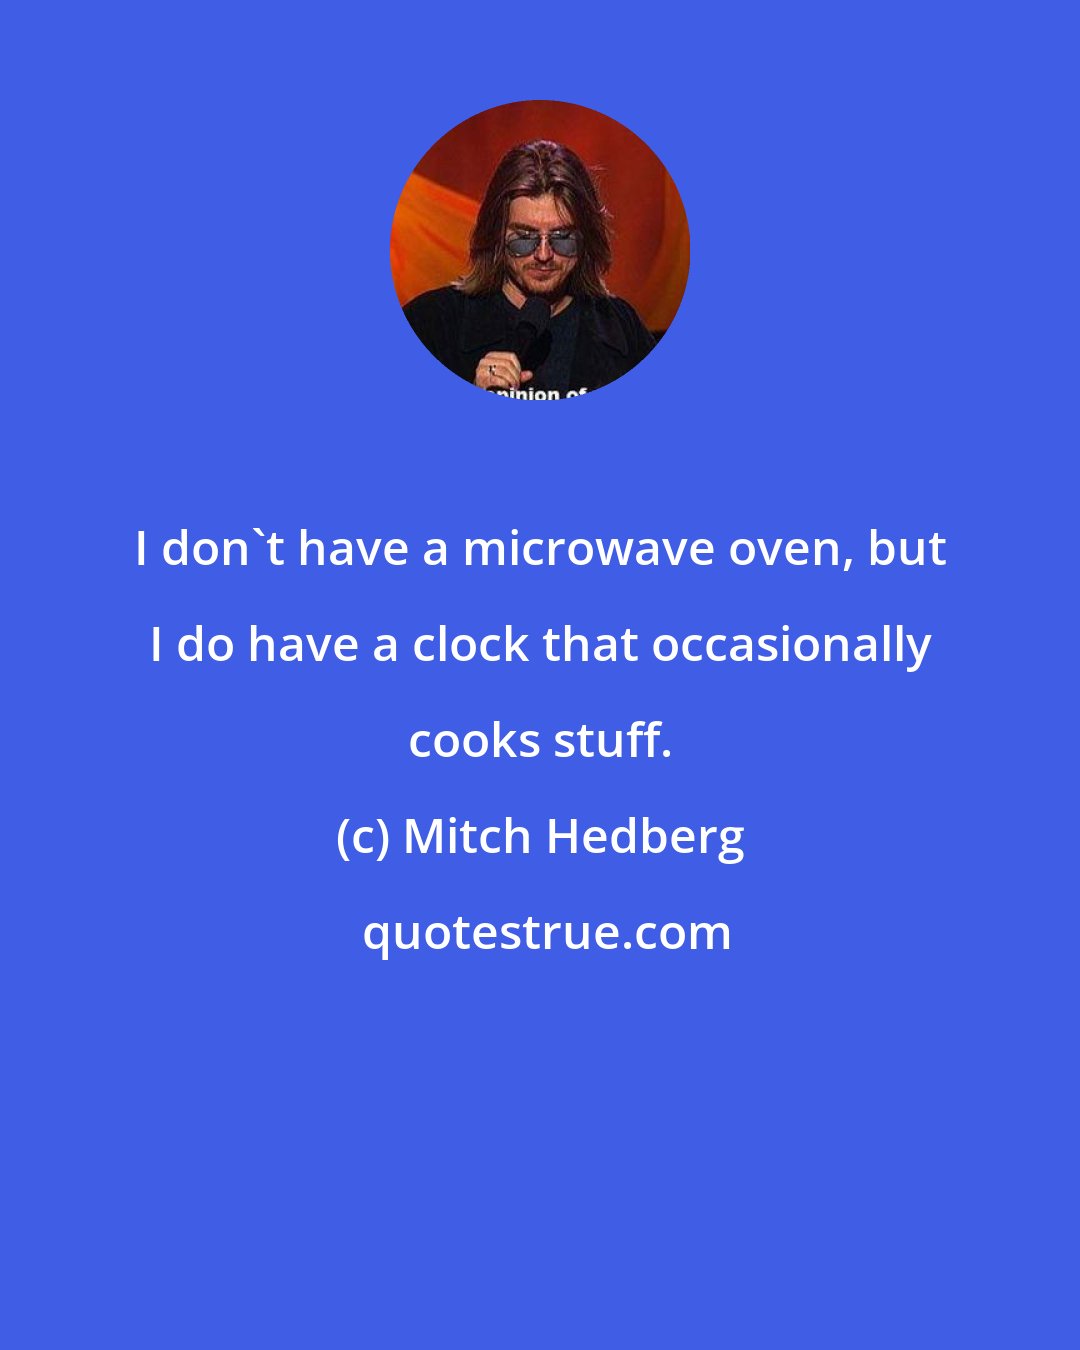 Mitch Hedberg: I don't have a microwave oven, but I do have a clock that occasionally cooks stuff.